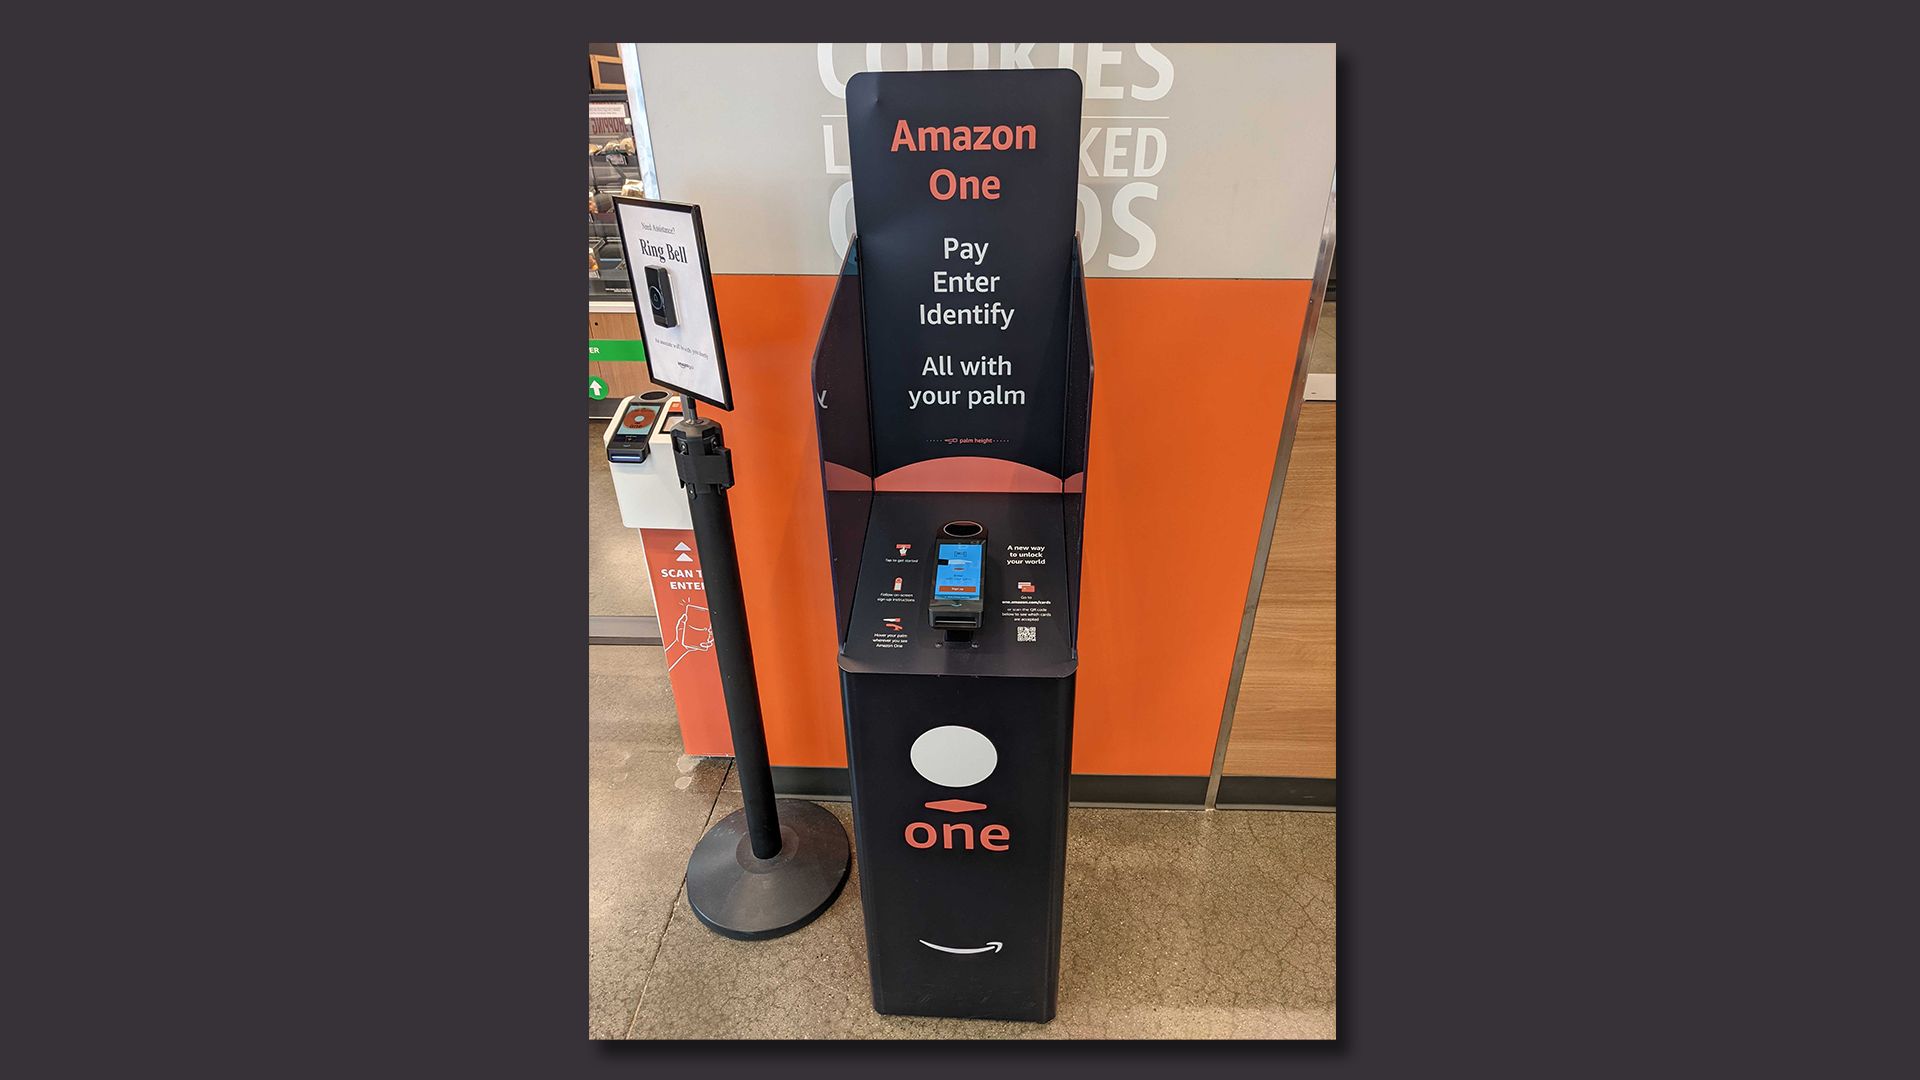 The Amazon One palm reader